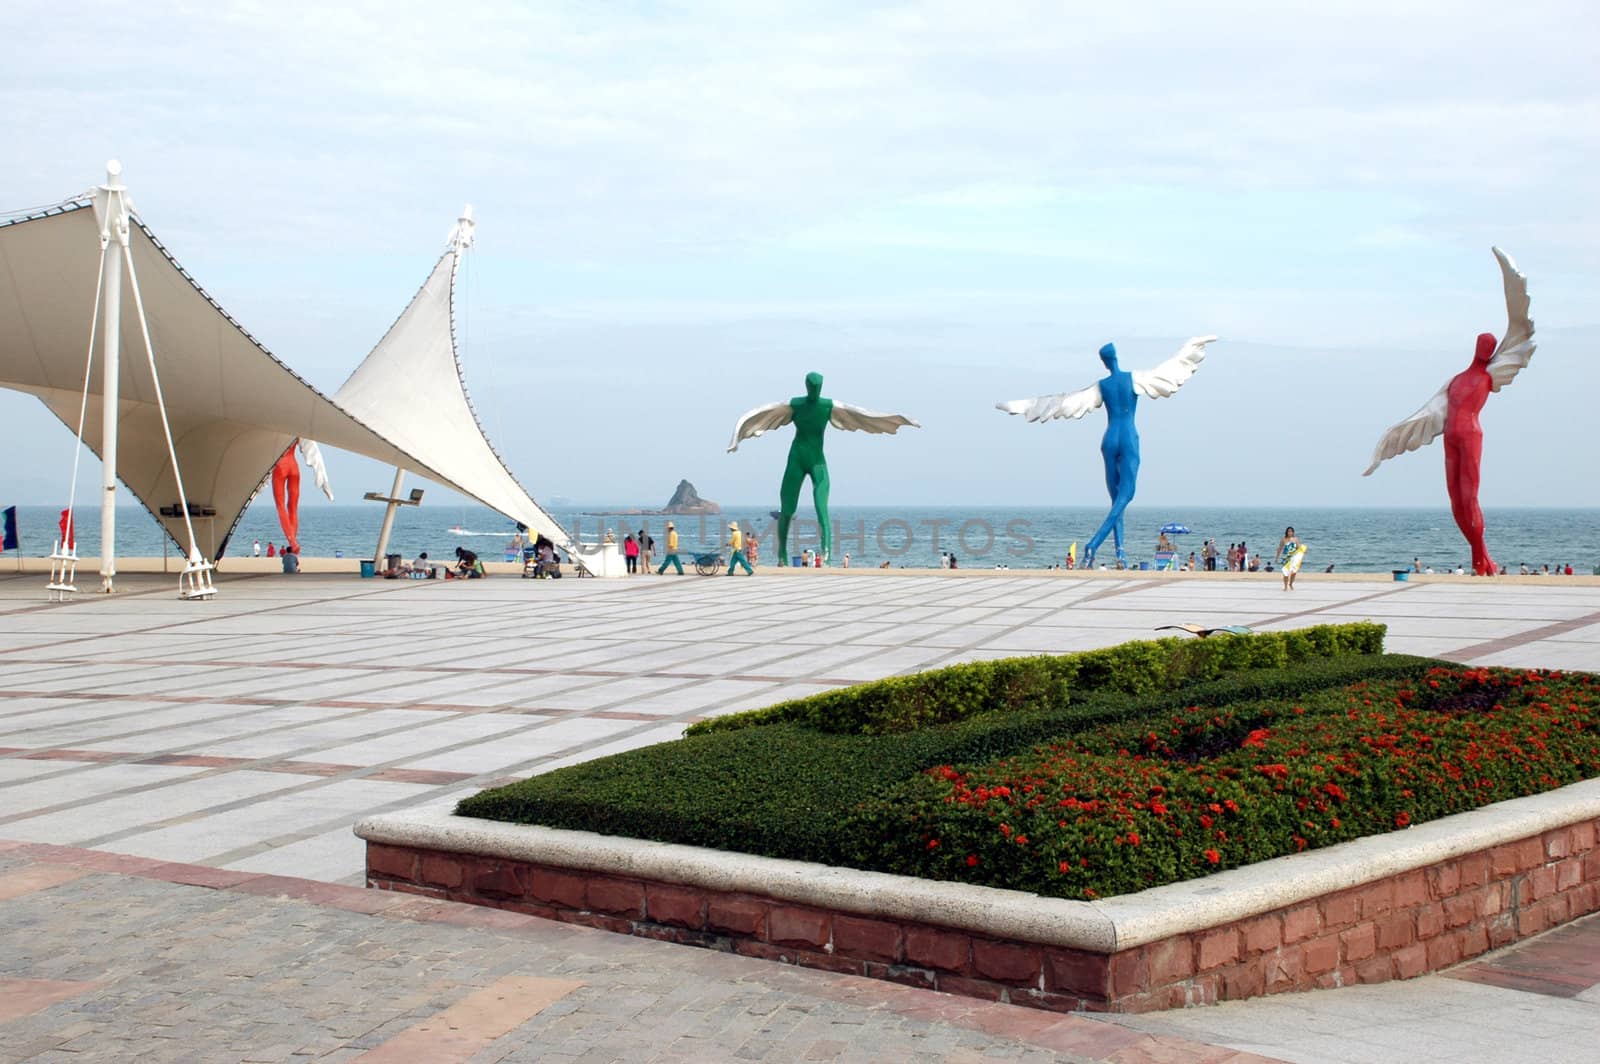 South China Sea, beach at DaMeiSha near Shenzhen city in Guangdong province. Place decorated by big angels sculptures.